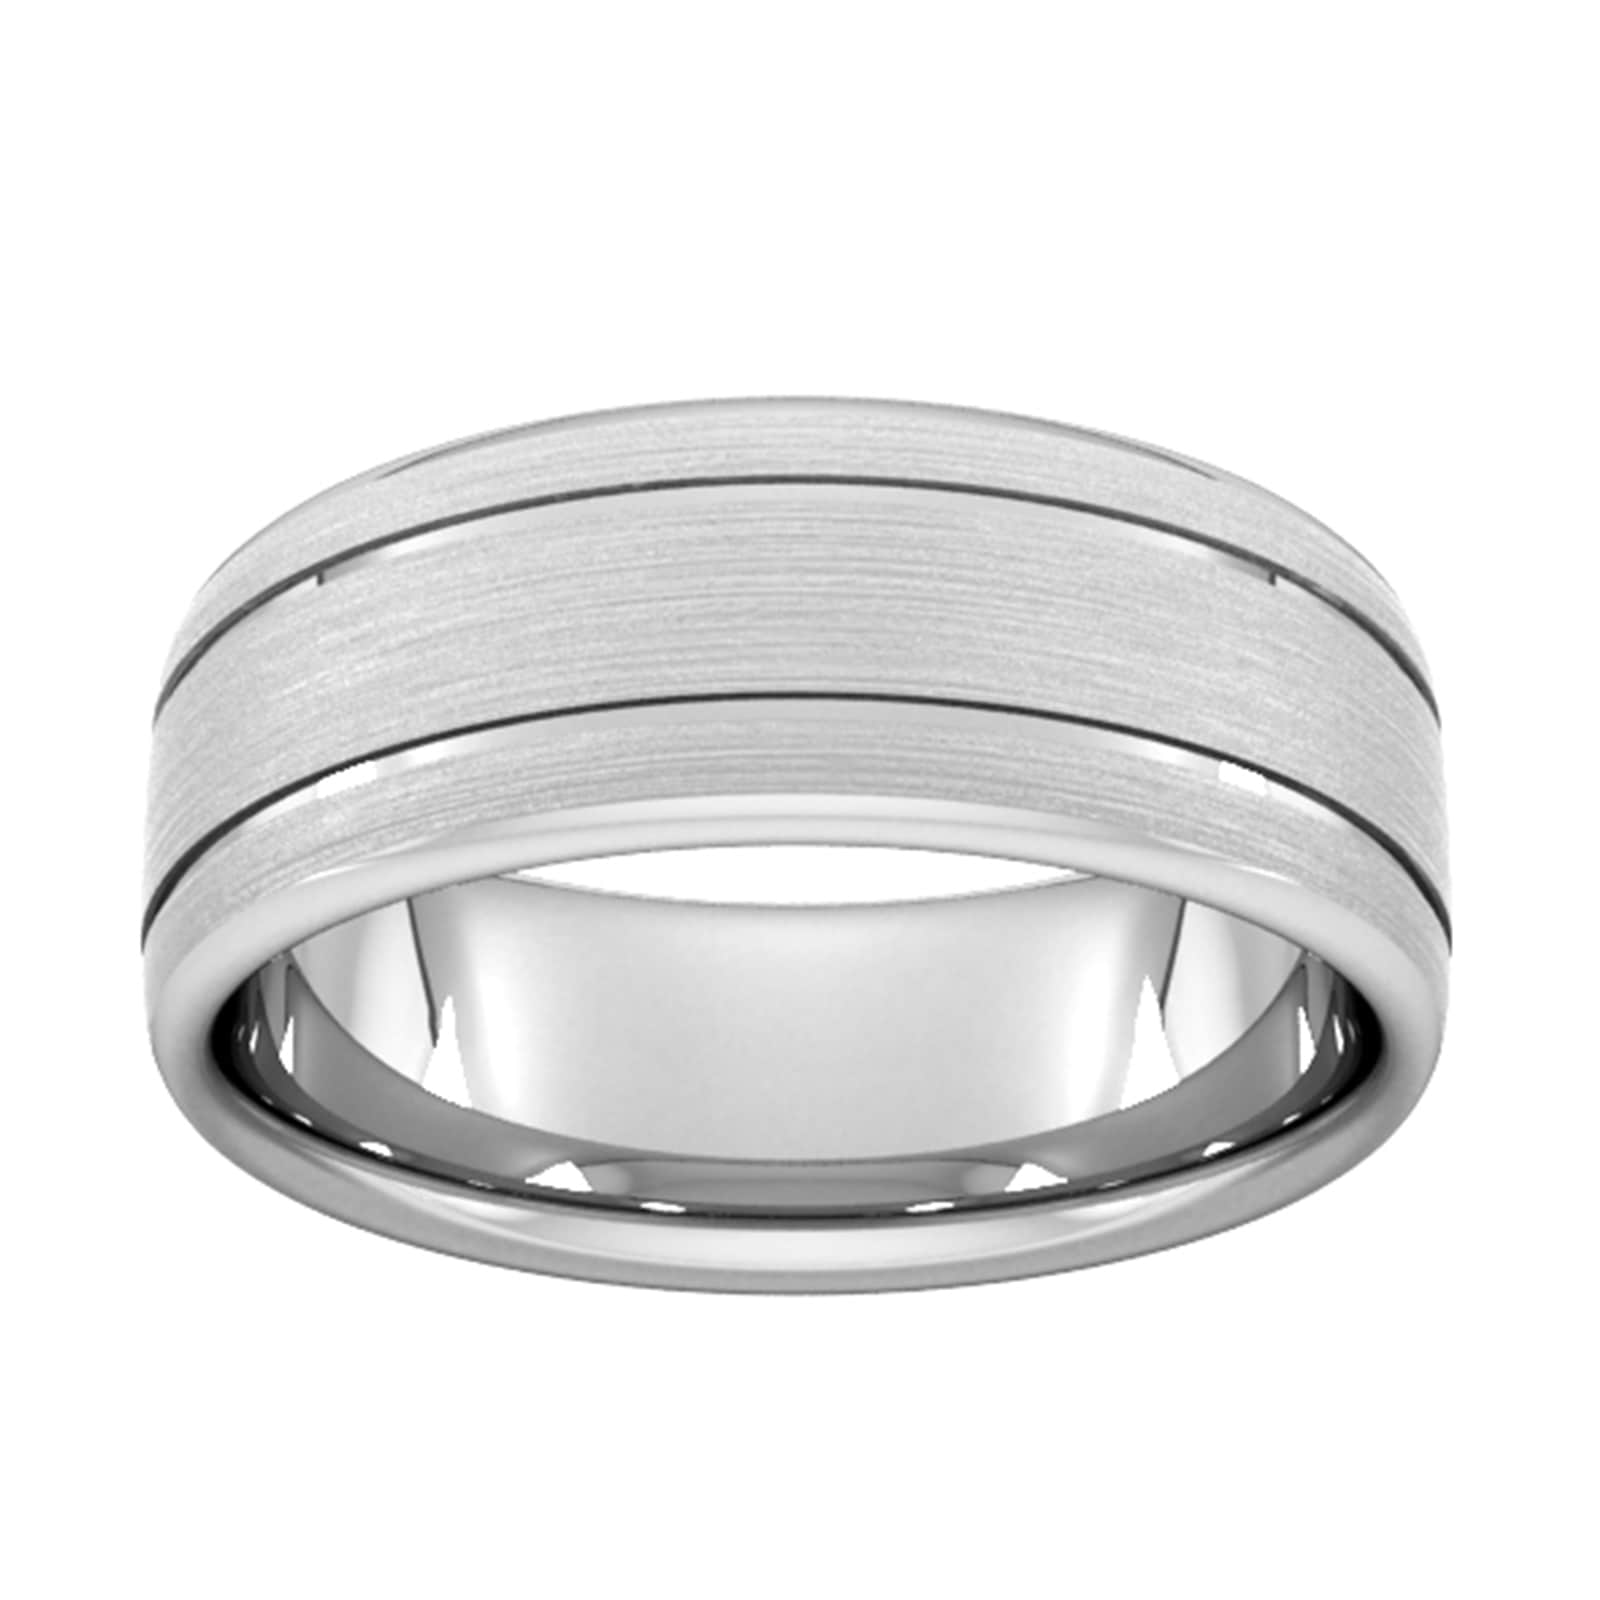 8mm Slight Court Standard Matt Finish With Double Grooves Wedding Ring In 9 Carat White Gold - Ring Size P